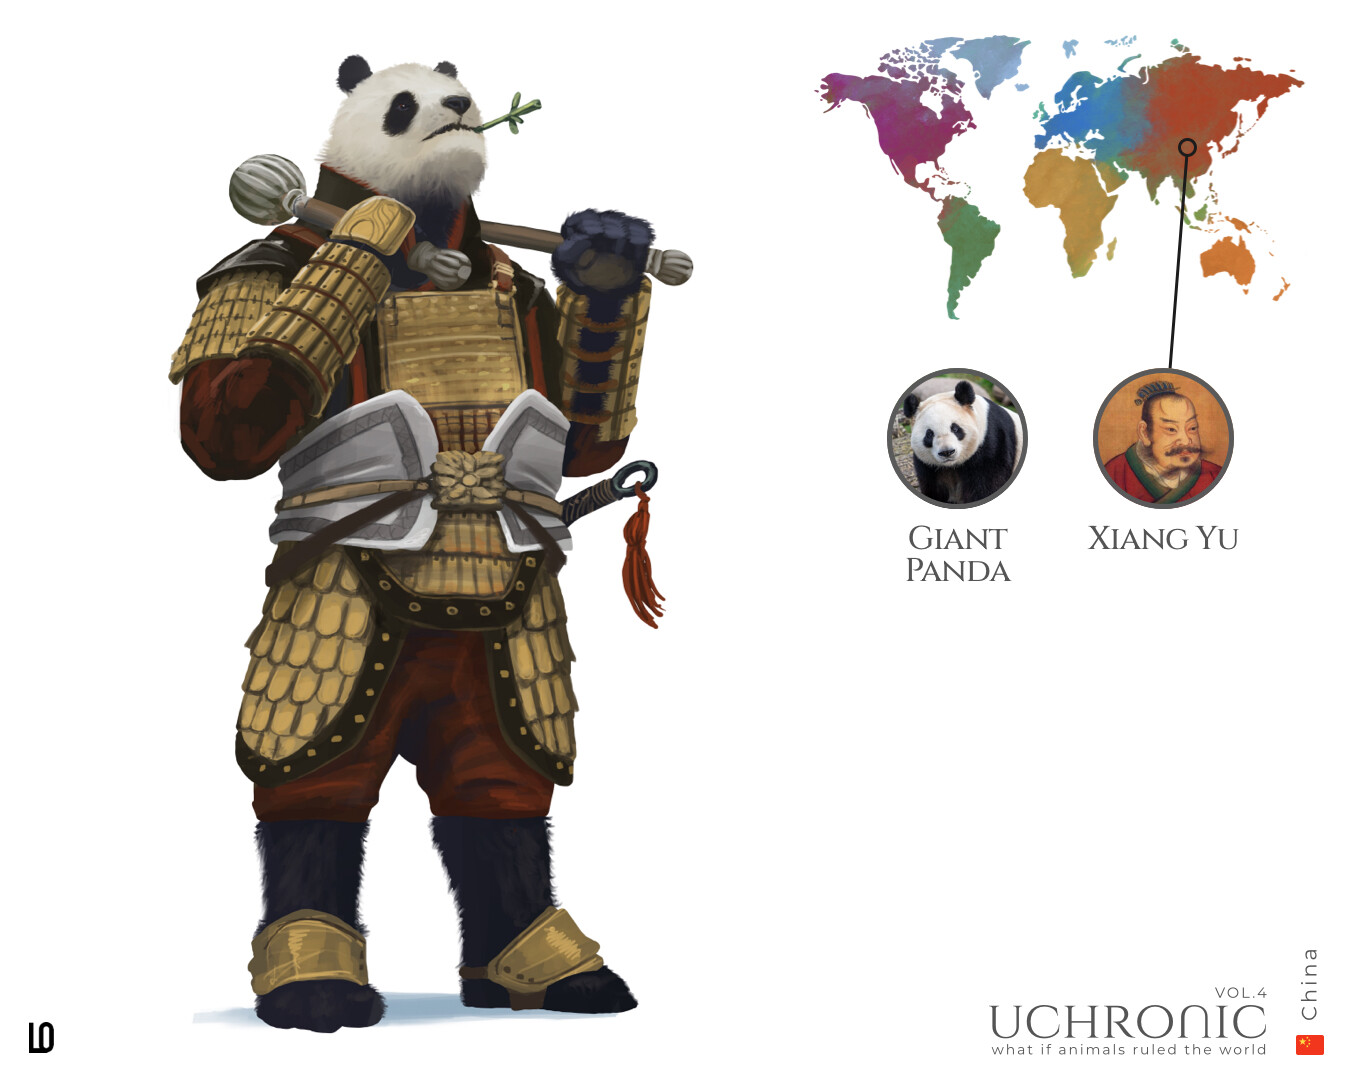 ! From ancient China, a great warrior and genéralo from the Qin Dinasty (more than 2.200 years ago), the great Xiang Yu, as the unique Giant Panda.